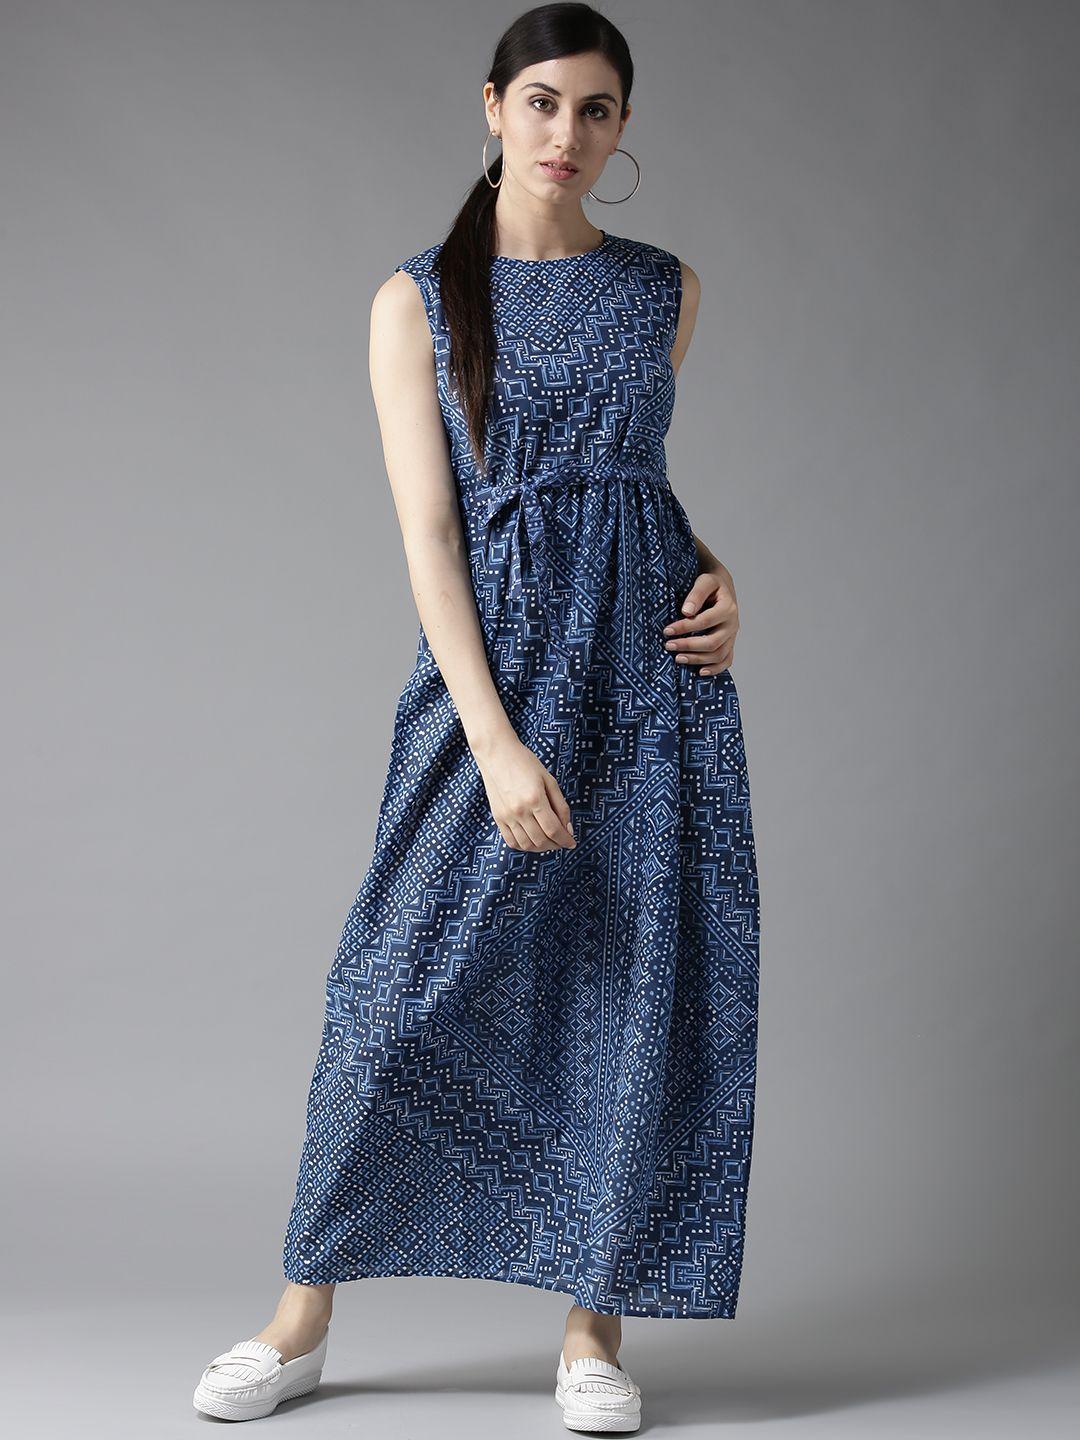 here&now-women-blue-printed-maxi-dress